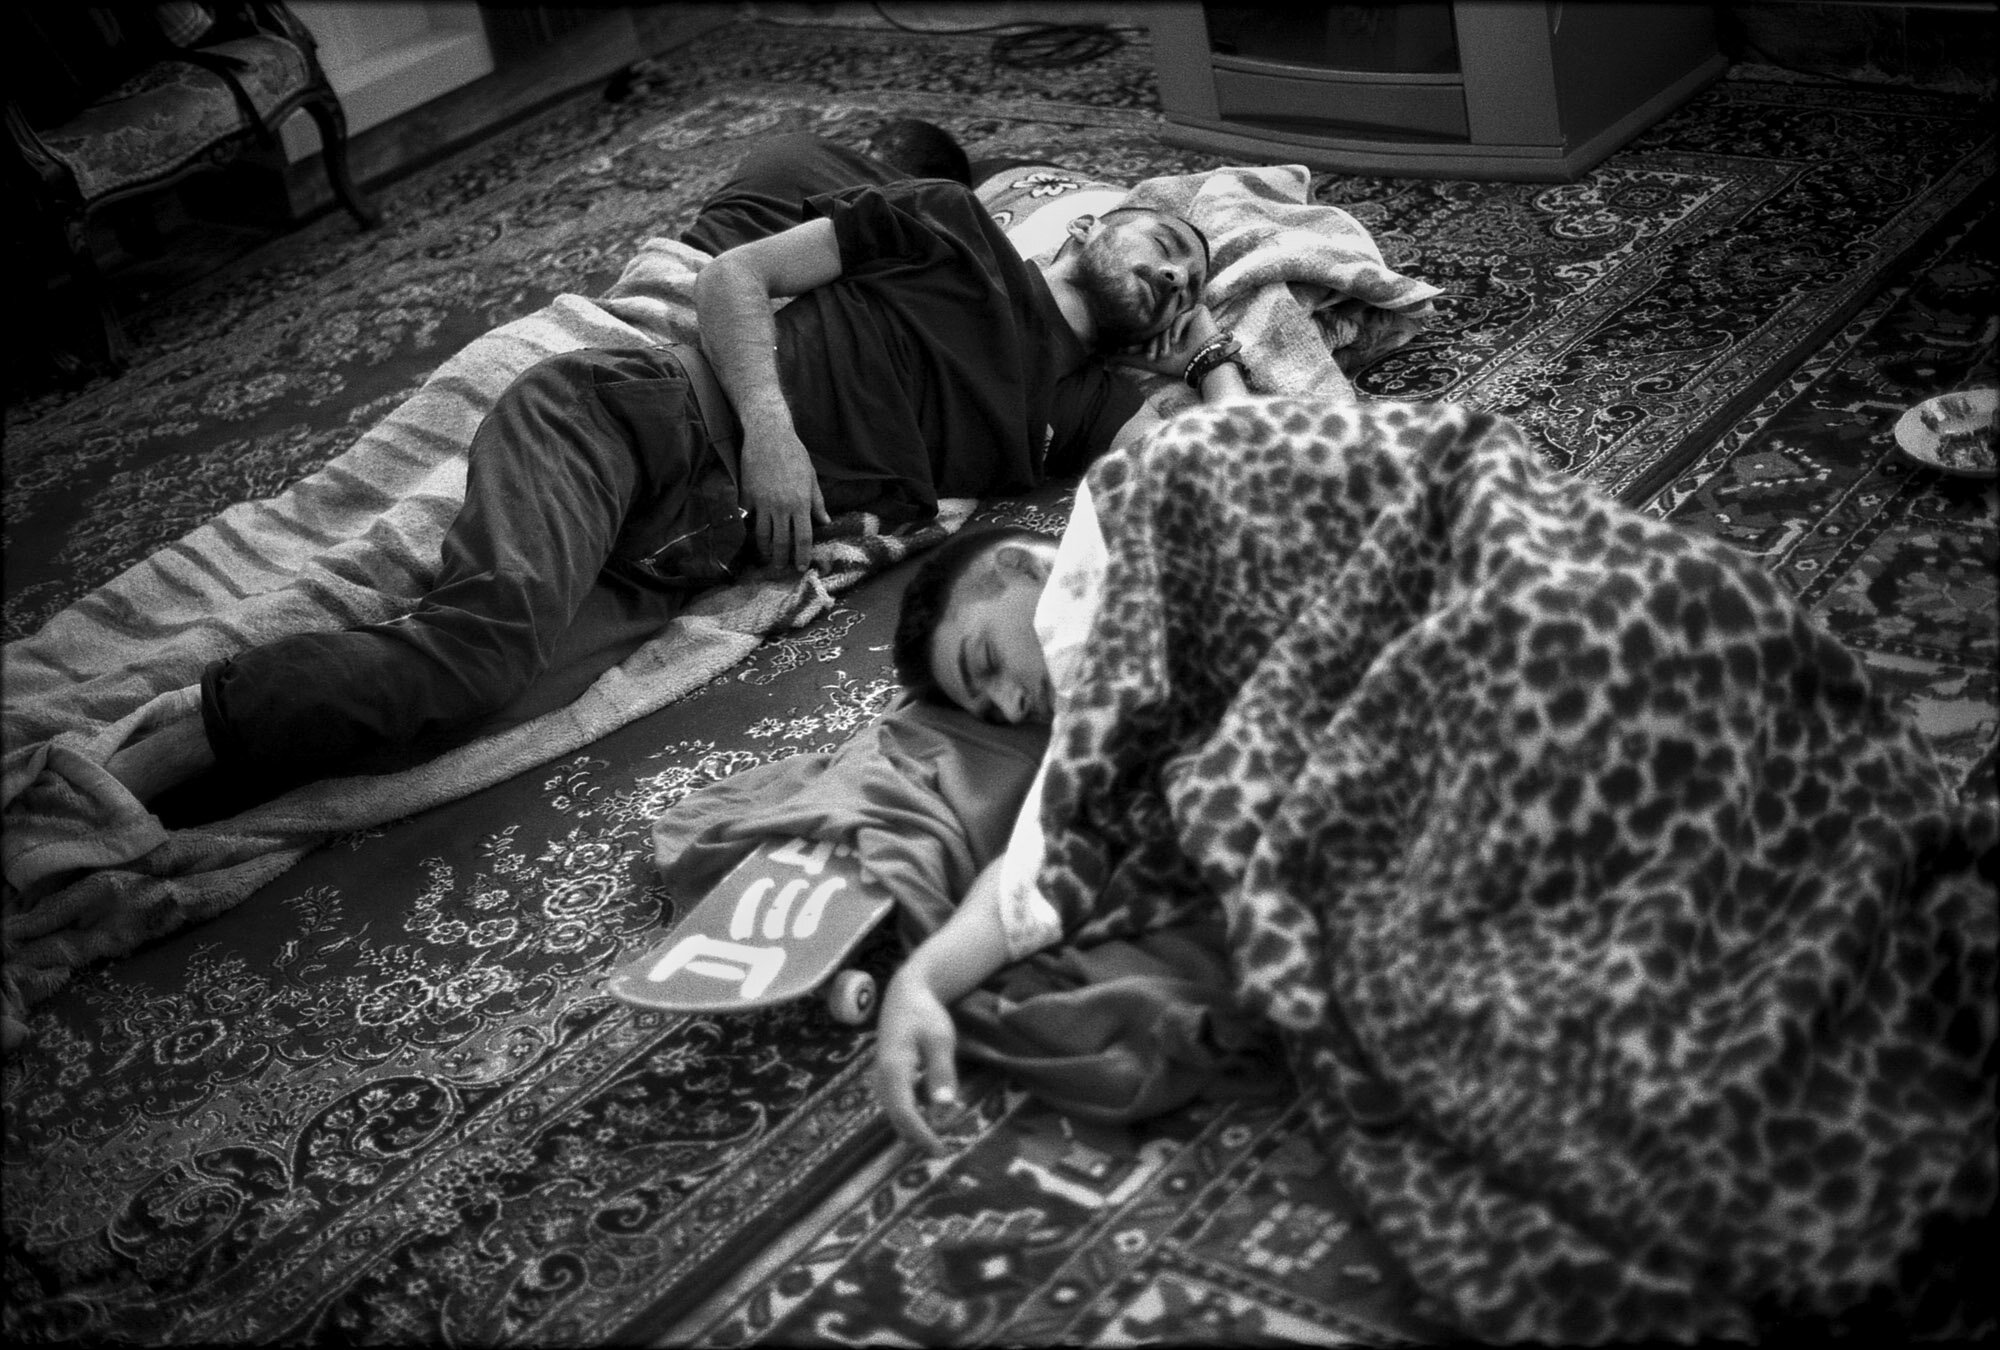  Erfan and Arian sleep on Persian rugs. Arian uses a skateboard as a pillow. Isfahan, Iran, September 28, 2015. 